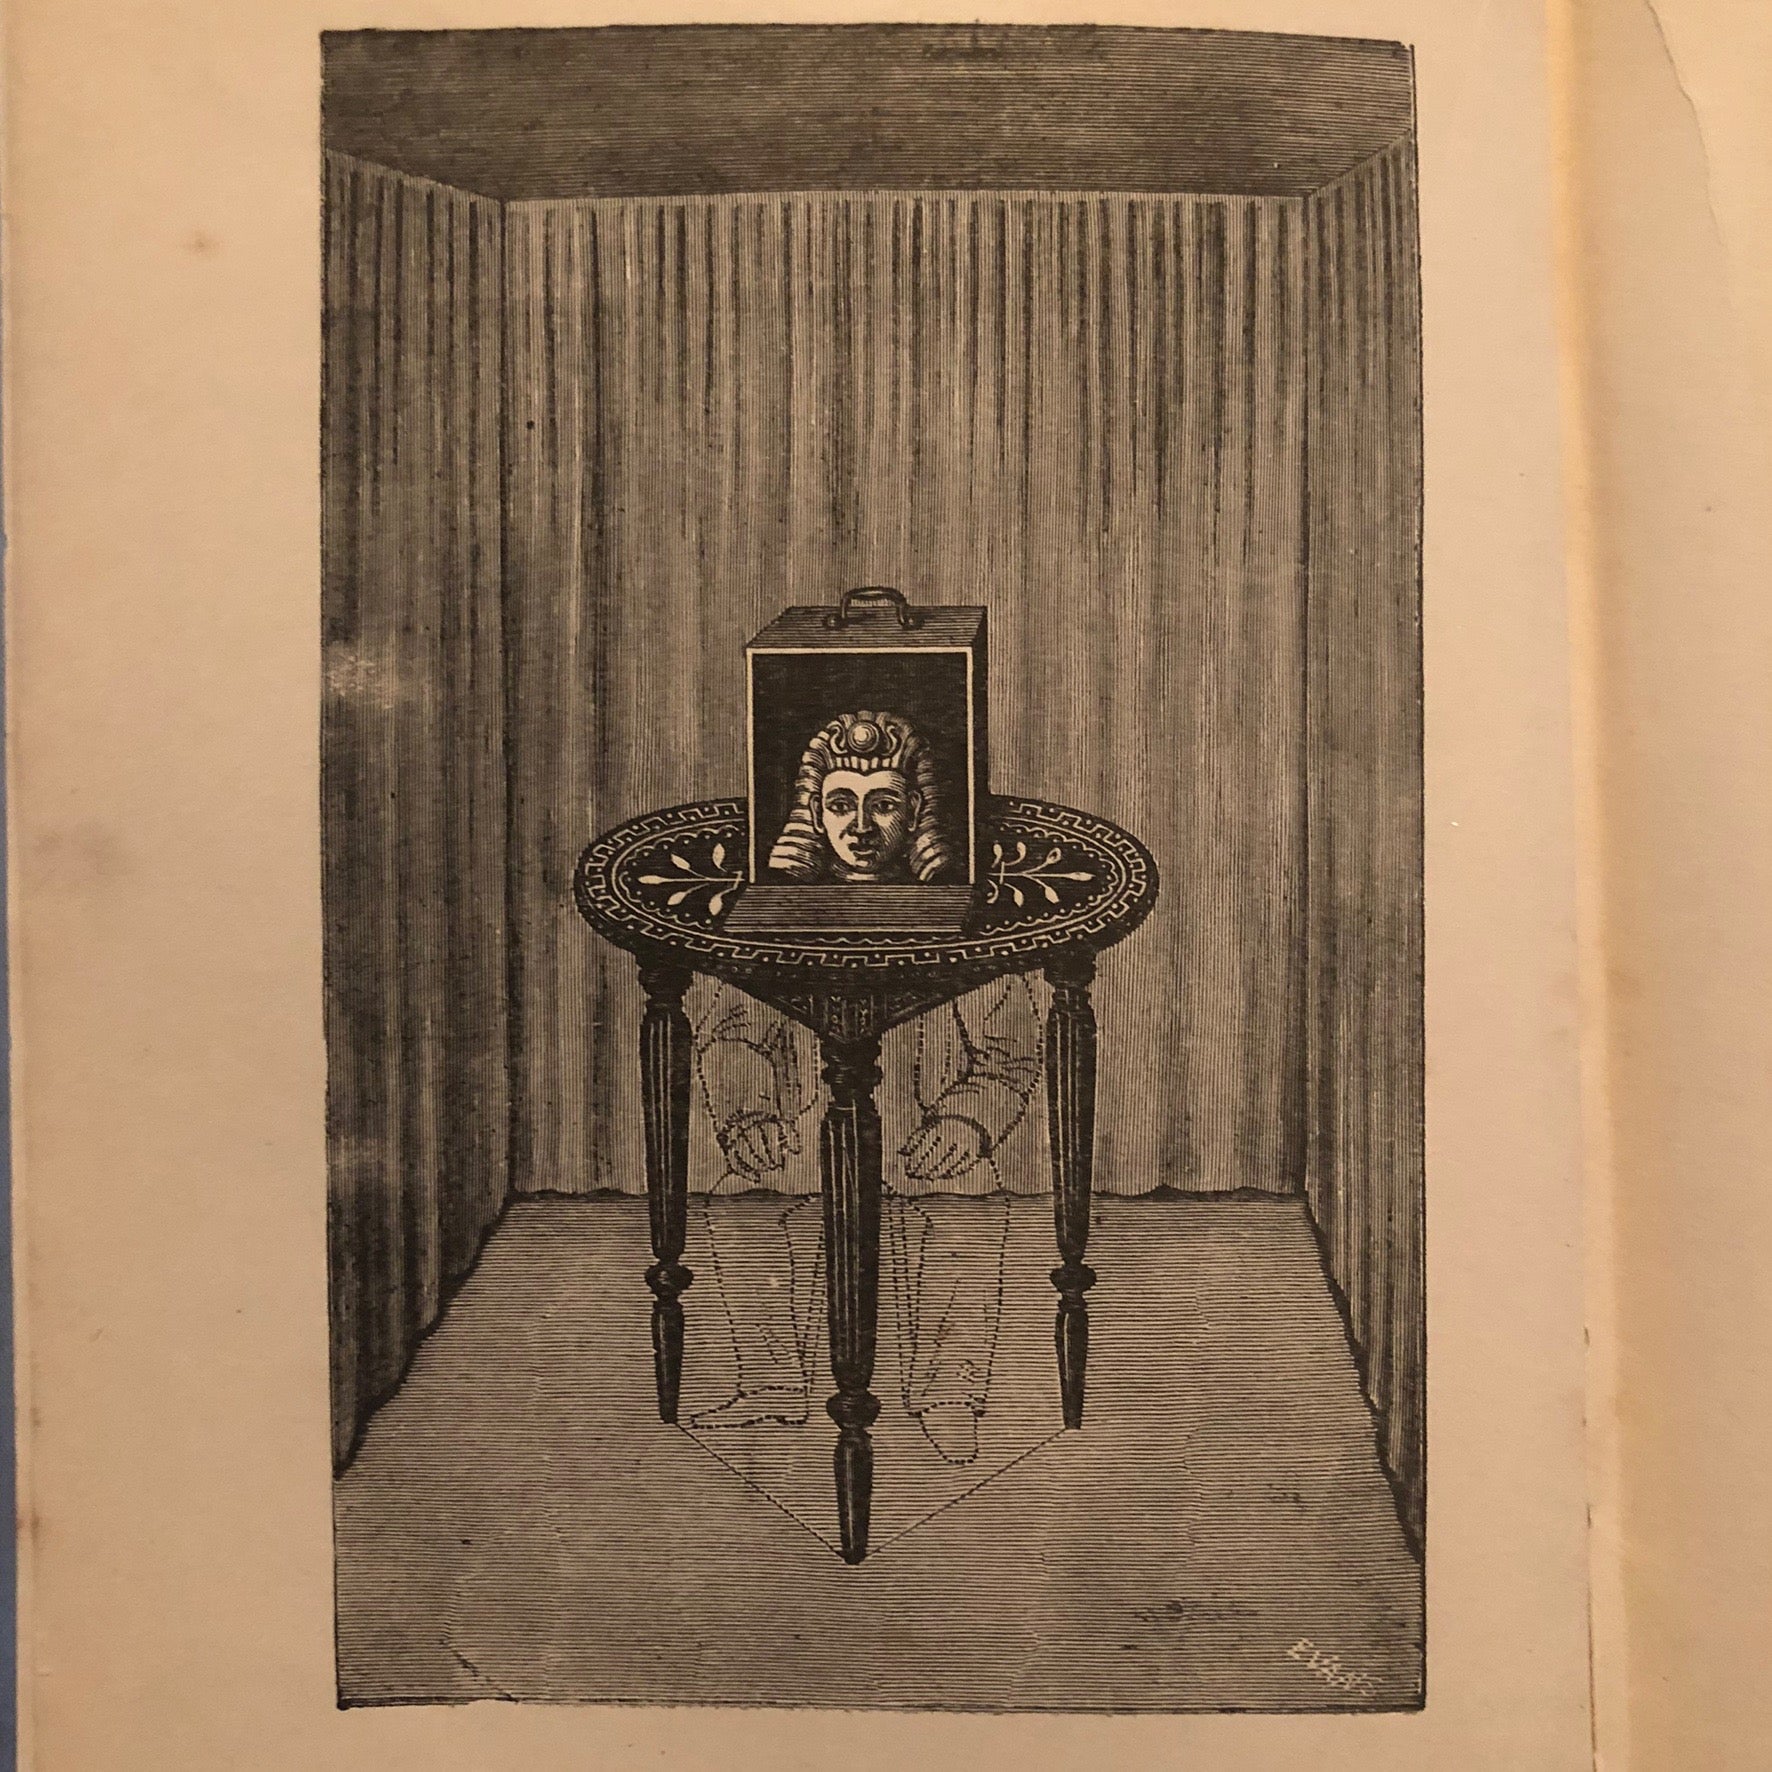 Engraving from Rare Modern Magic Book by Professor Hoffmann - Late 1800s - Collectible Hard Cover Volume - Underground Literature - Art of Conjuring